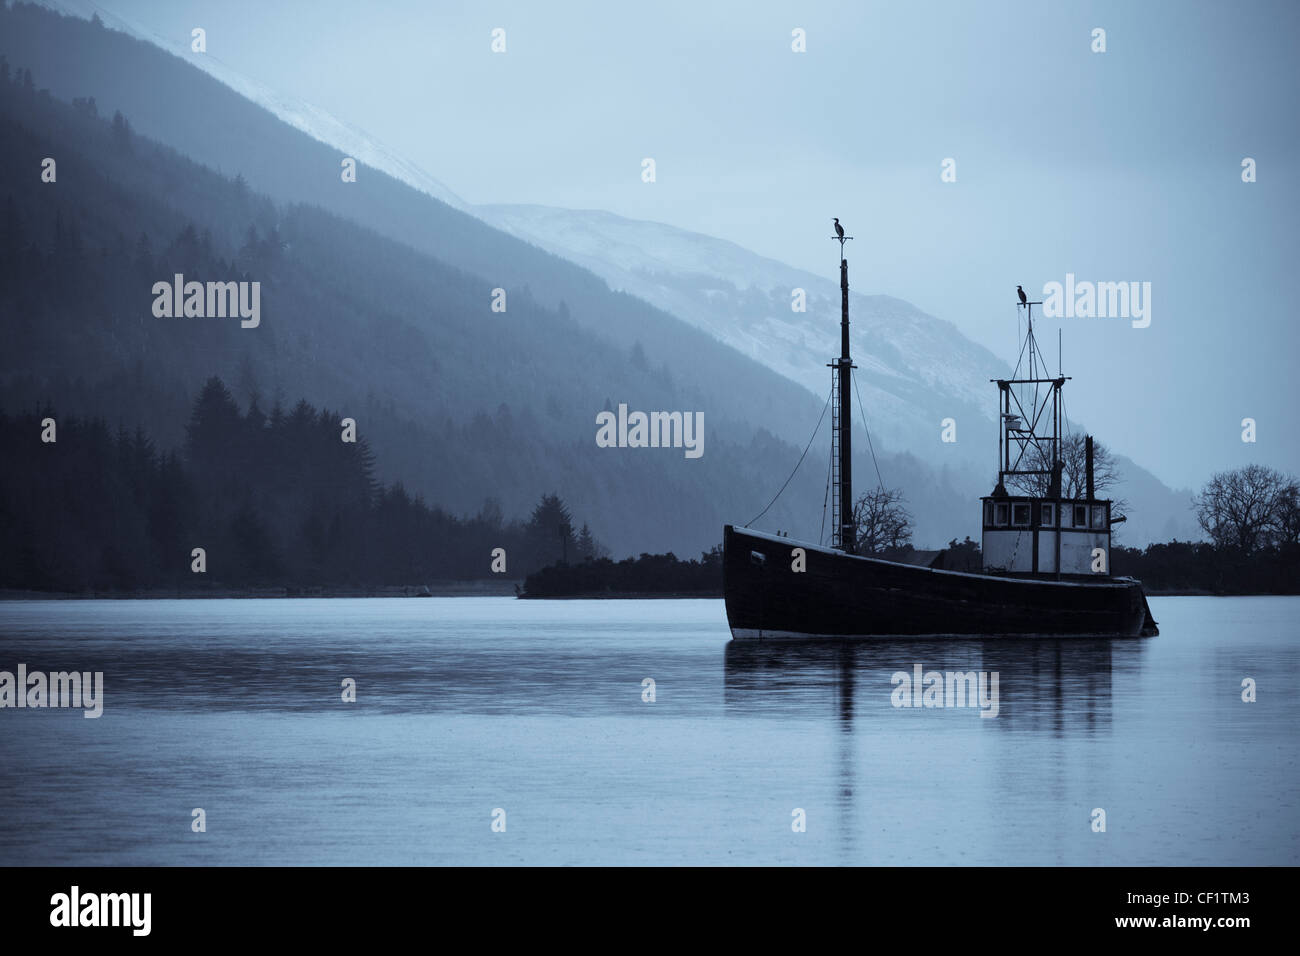 An old trawler rests on Loch Lochy and two cormorants take advantage of the excellent look out points to search for food. Stock Photo